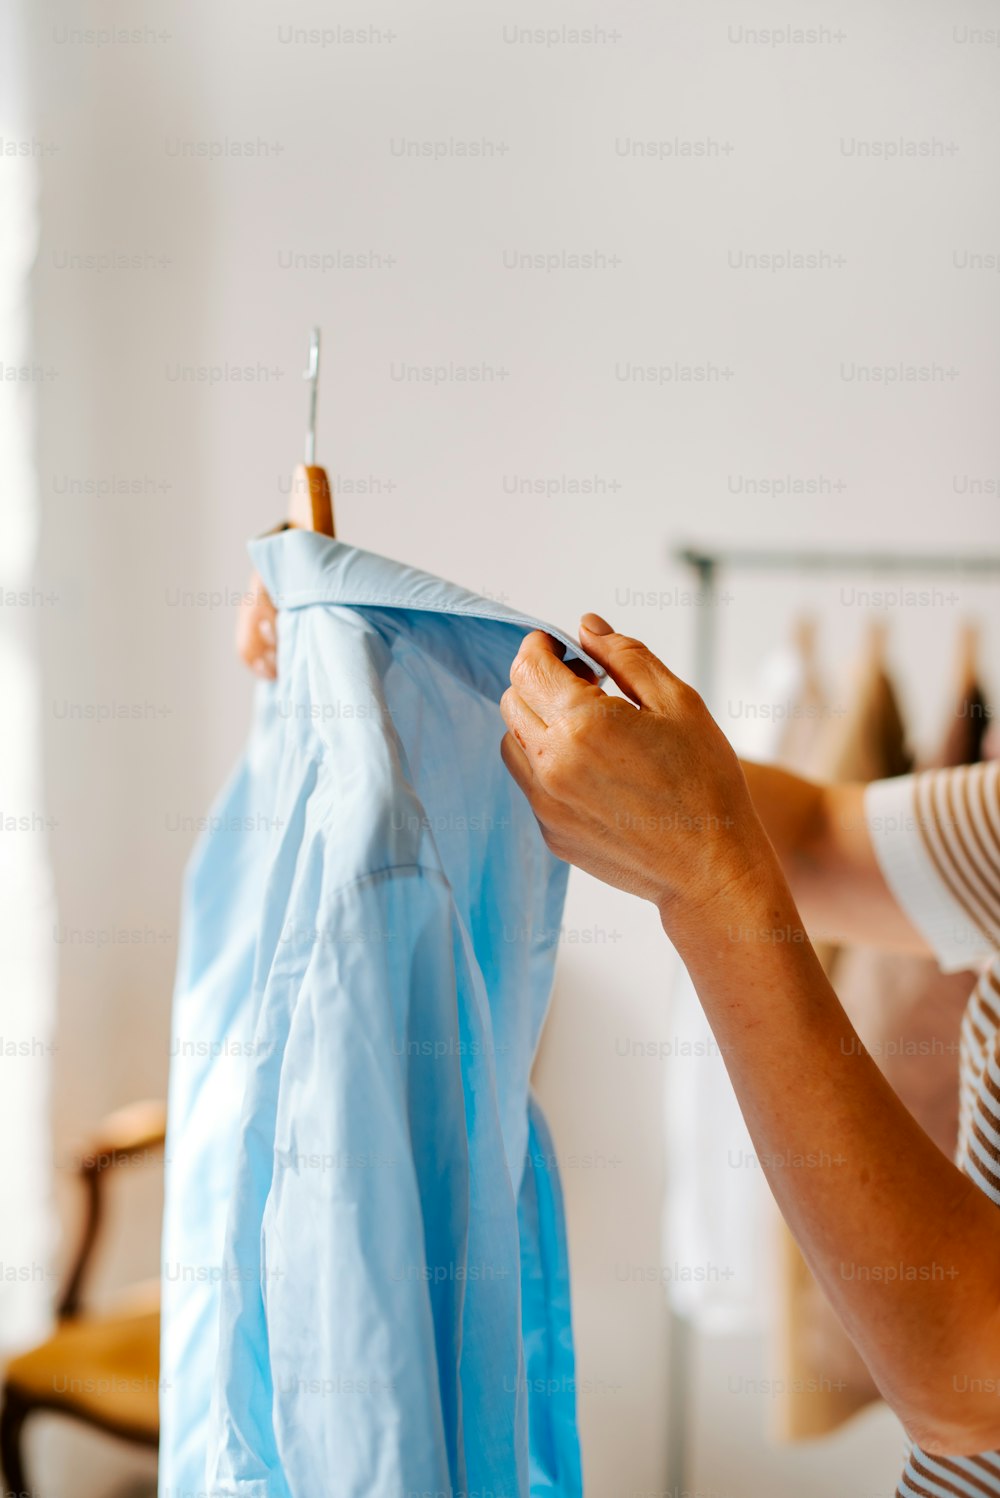 a woman holding a blue shirt on a clothes line